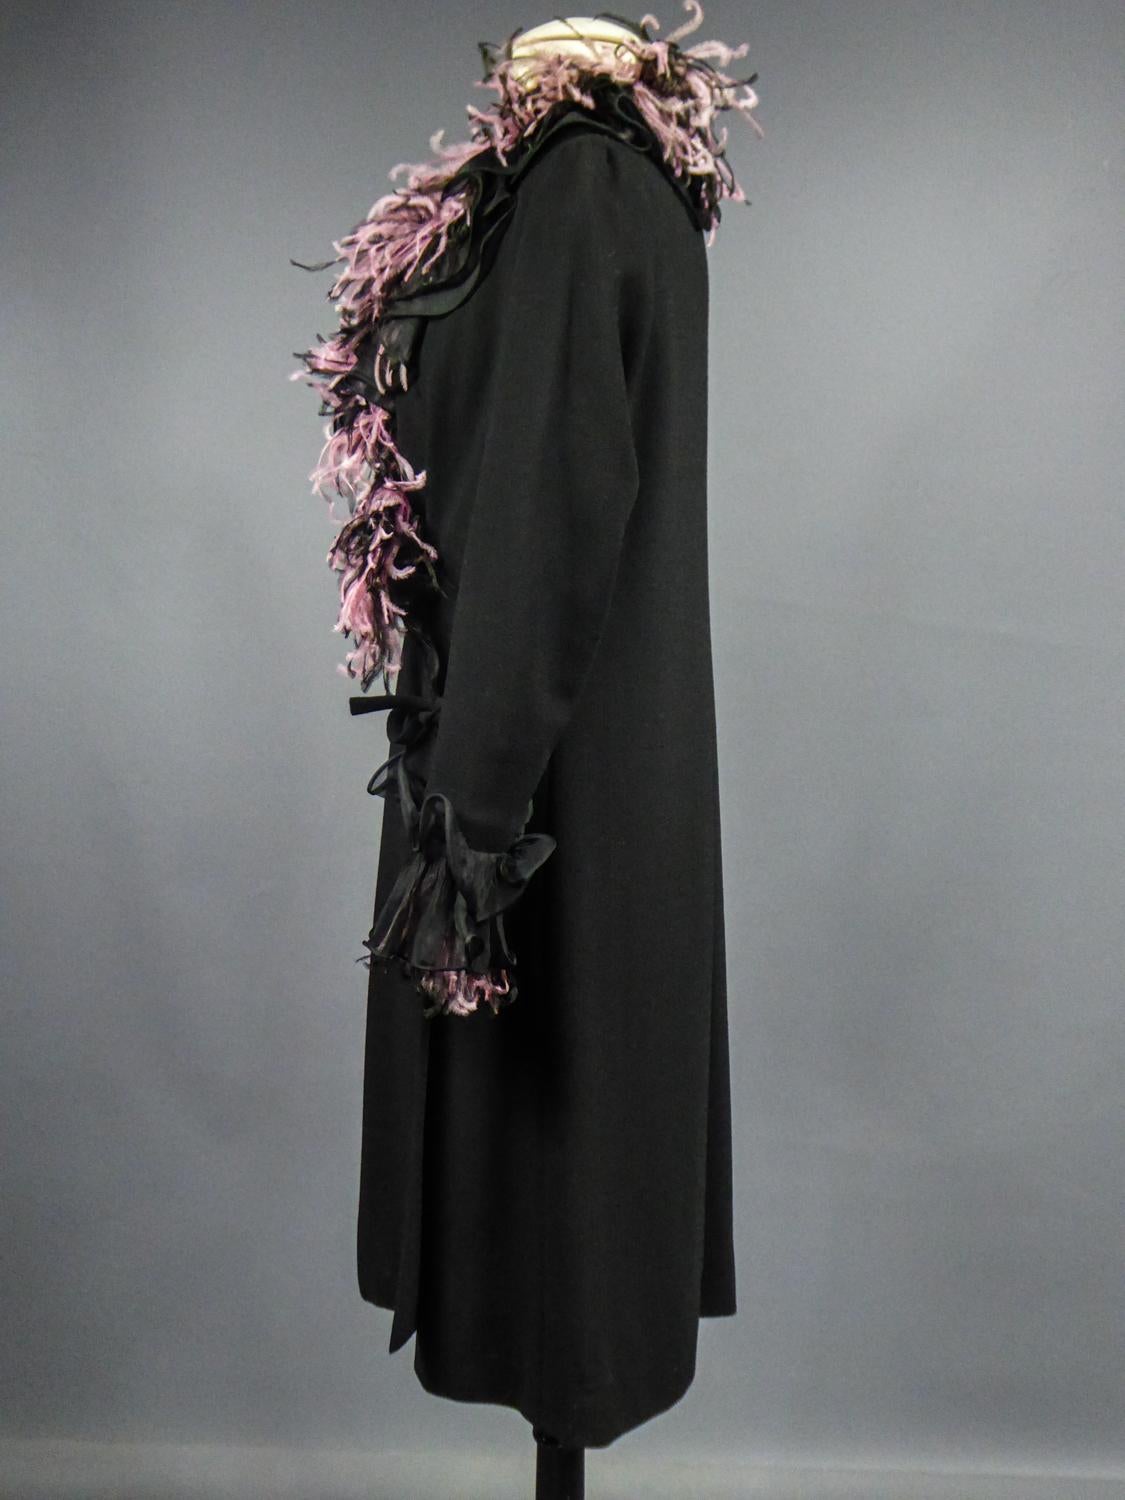 An Yves Saint Laurent Haute Couture Coat Dress Numbered 29390 Circa 1970/1980 For Sale 9